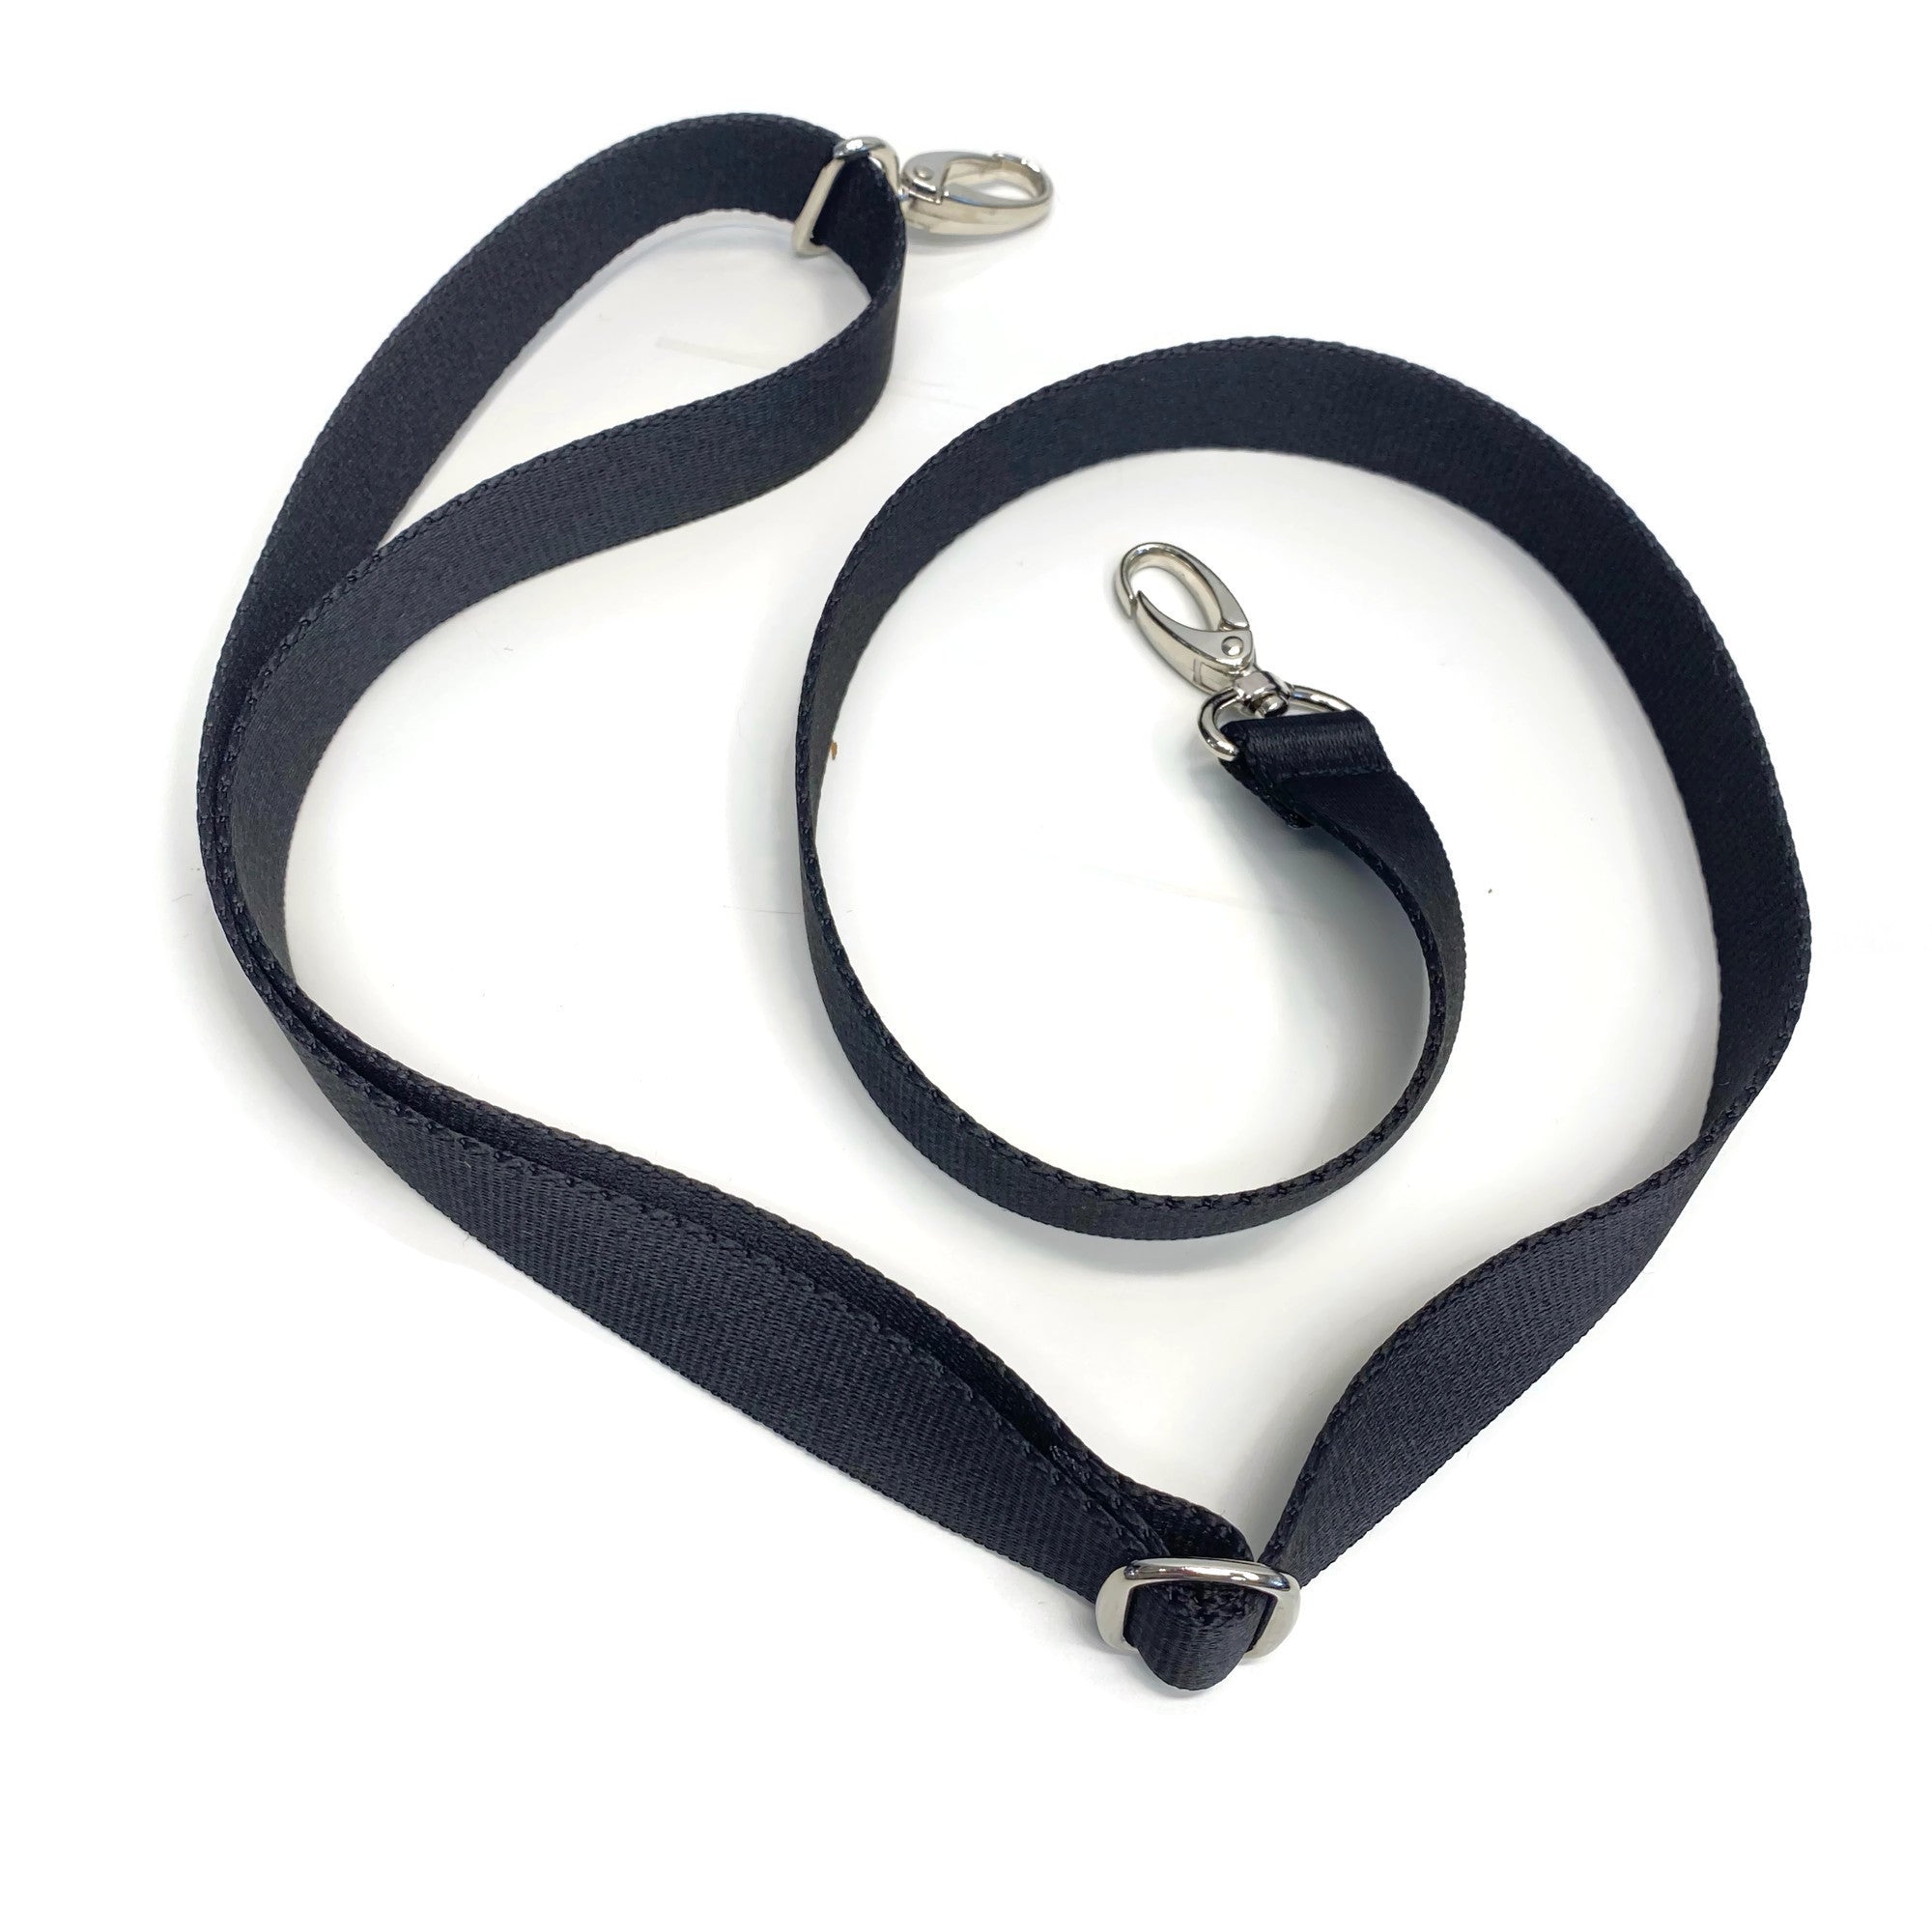 56" Long Adjustable 1" Strap with clips on each end